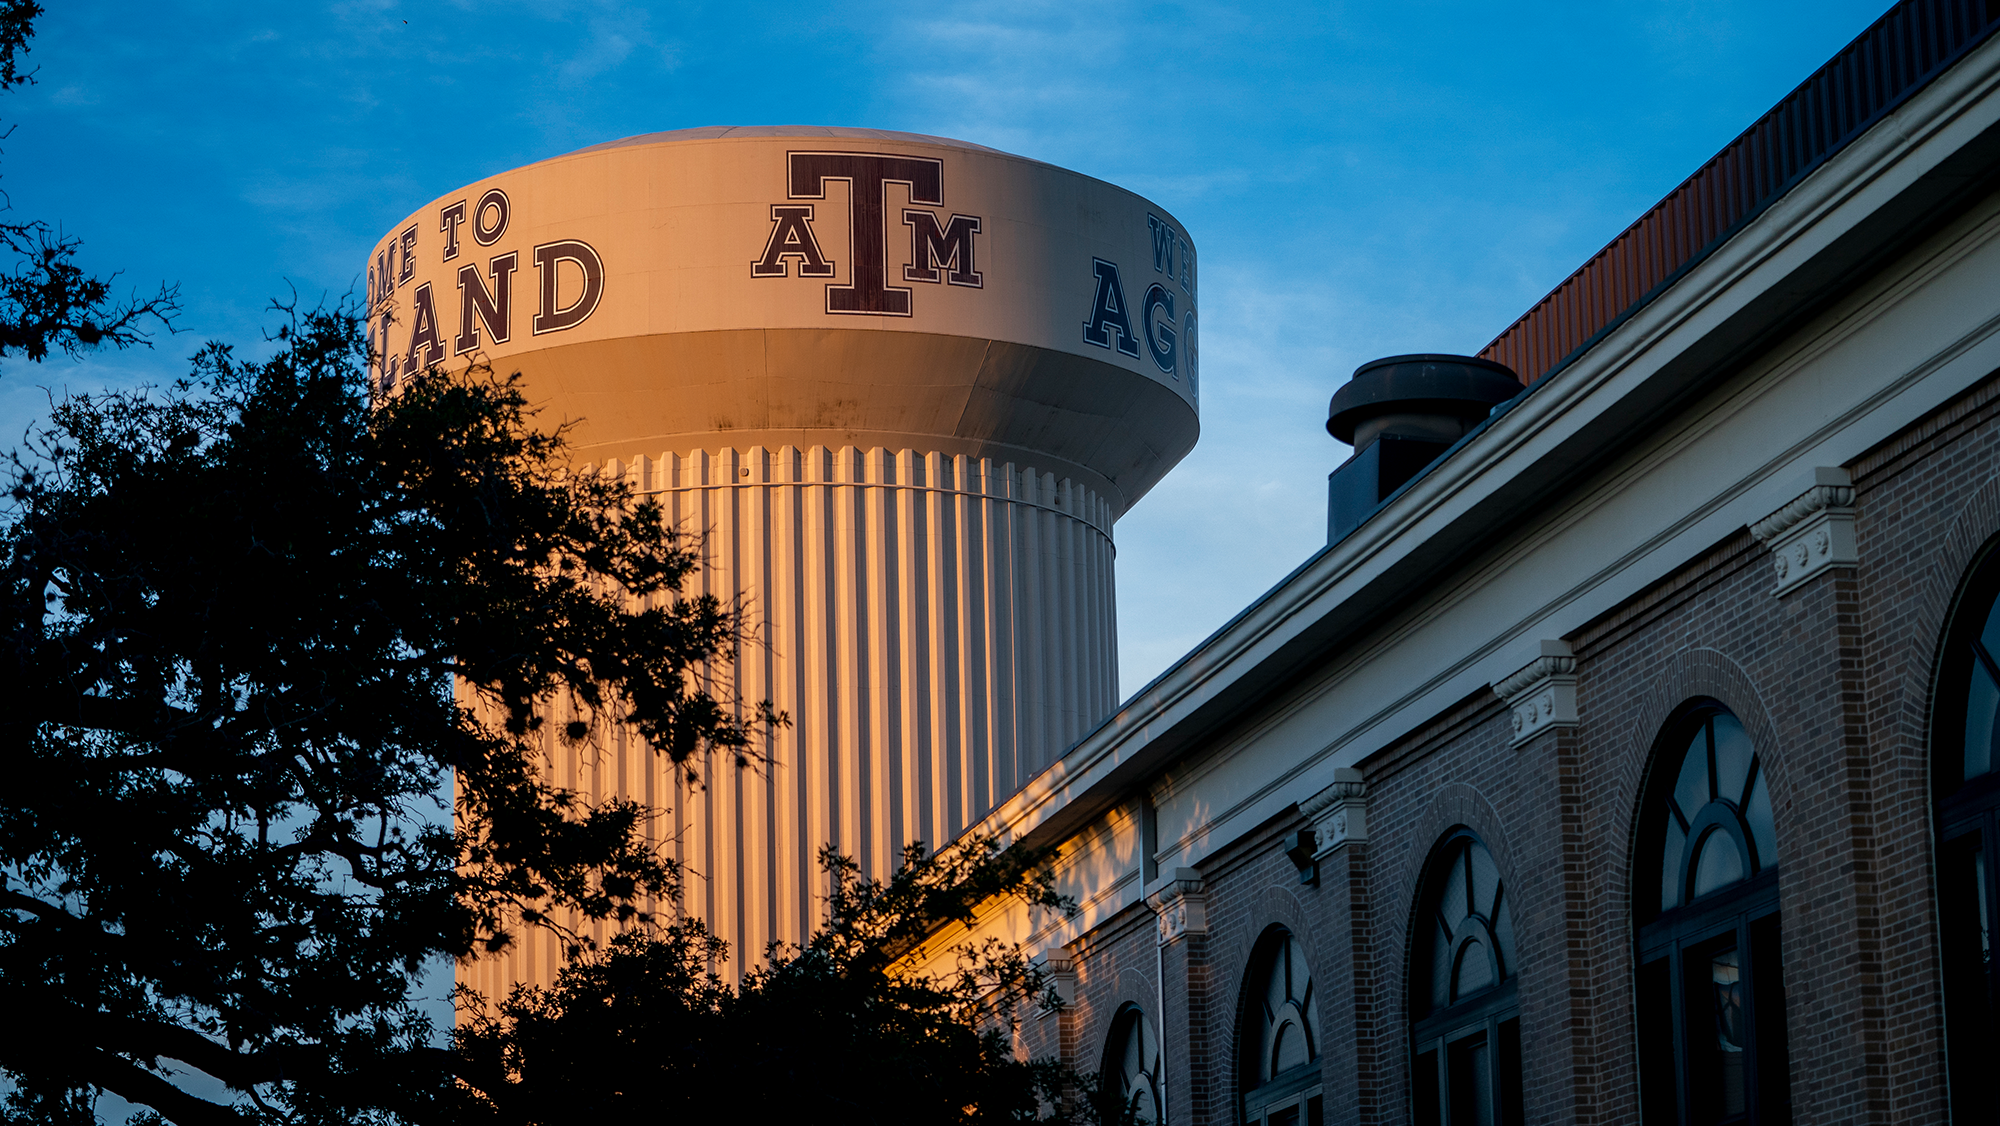 The water tower on the Texas A&M University campus